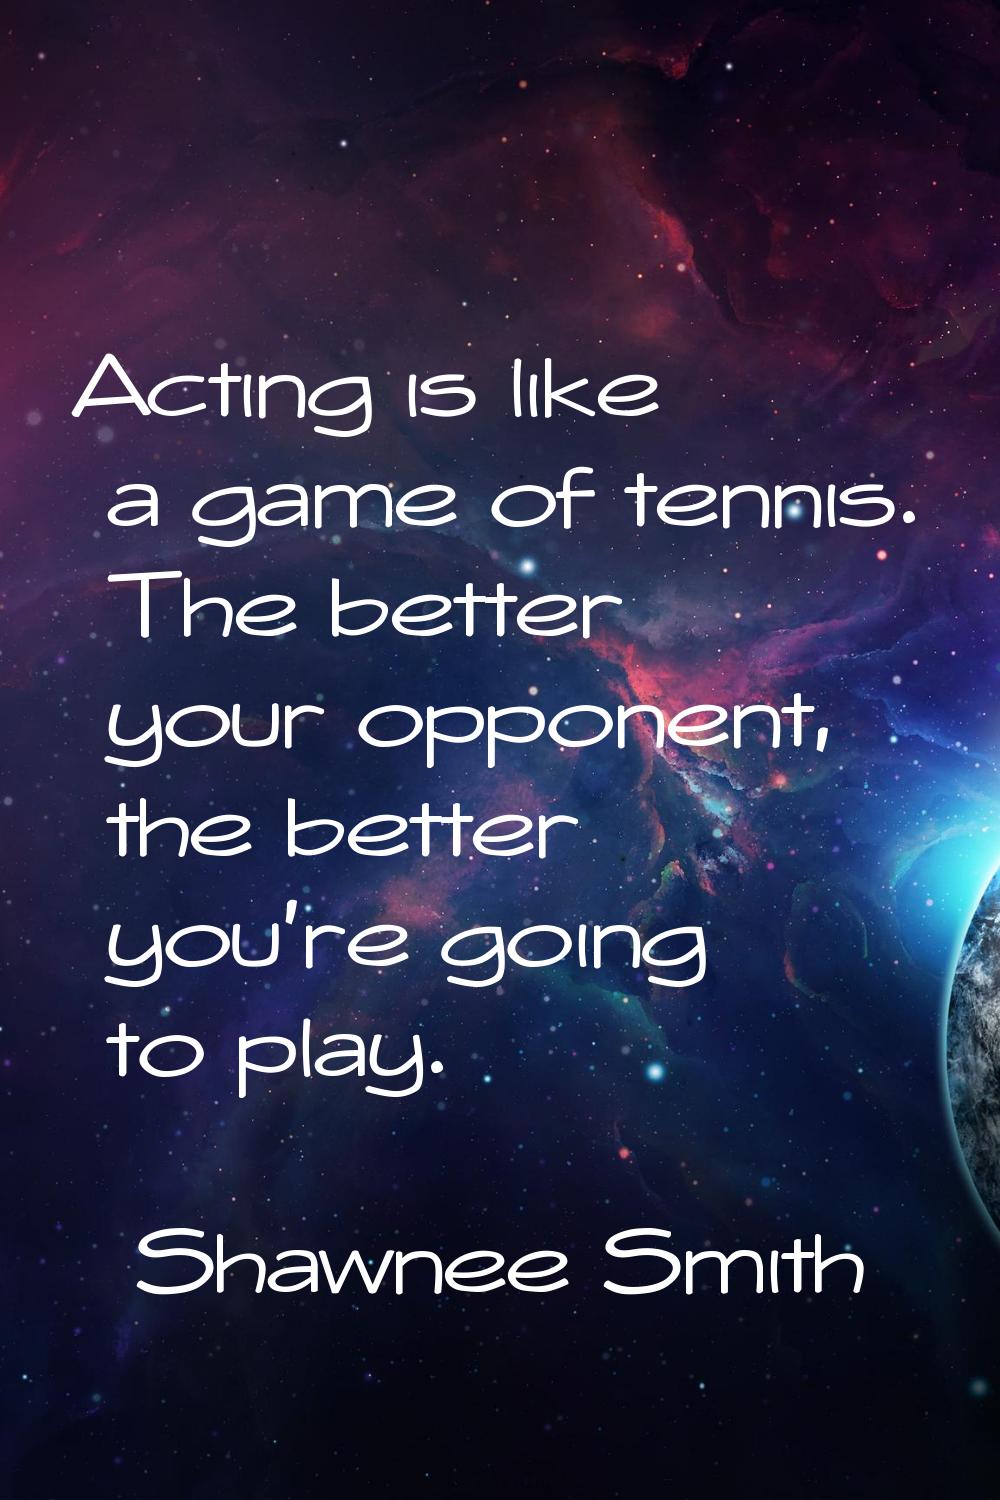 Acting is like a game of tennis. The better your opponent, the better you're going to play.